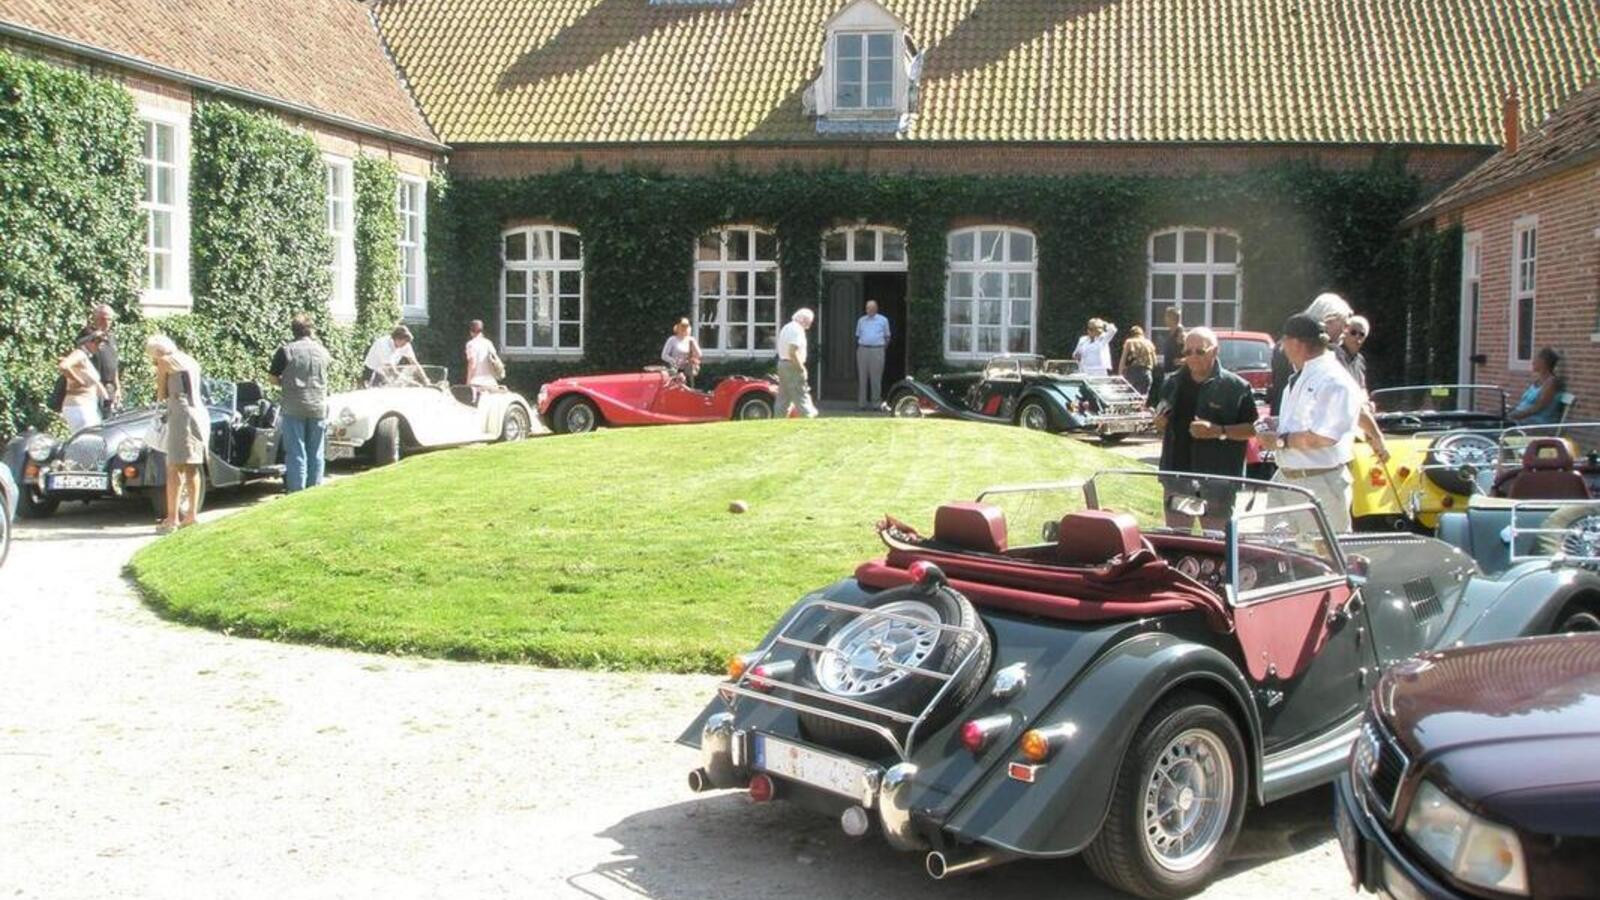 Oldtimer moments with the Ringhotels - Ringhotel Köhlers Forsthaus, 4-stars hotel in Aurich